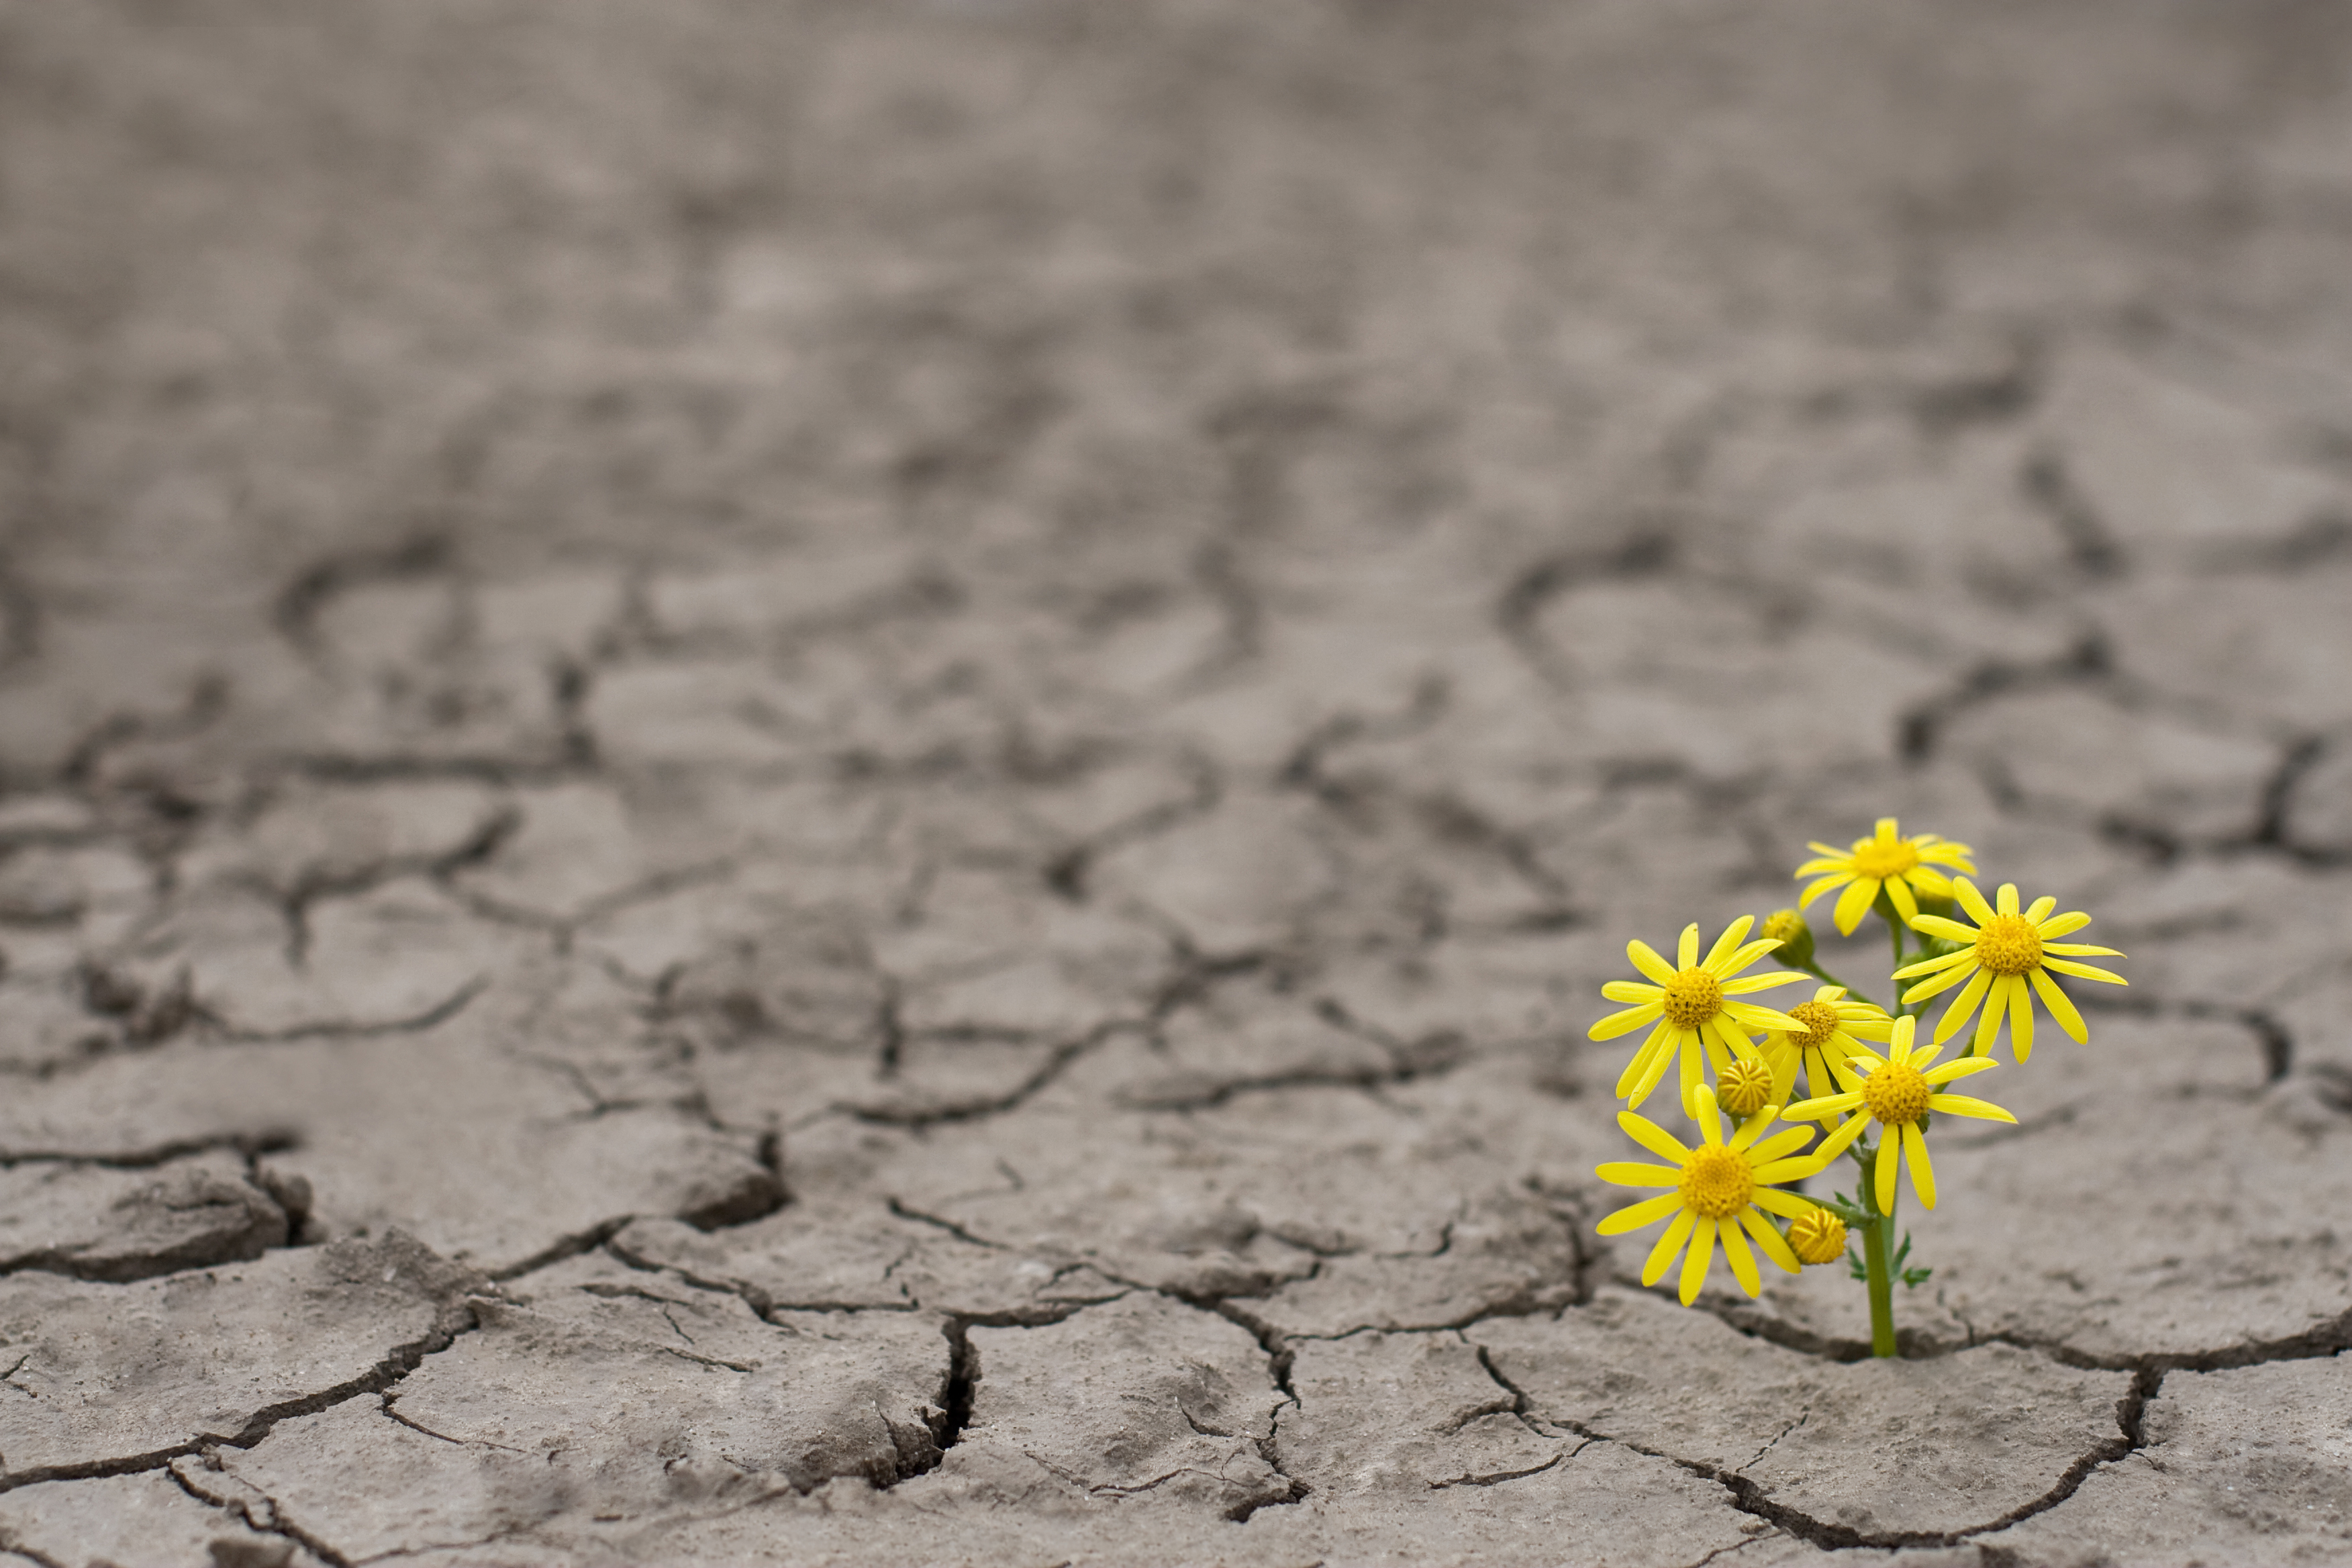 Horizontal side view of a lone yellow flower growing on dried cracked ground; Fundraising for the green startup downturn